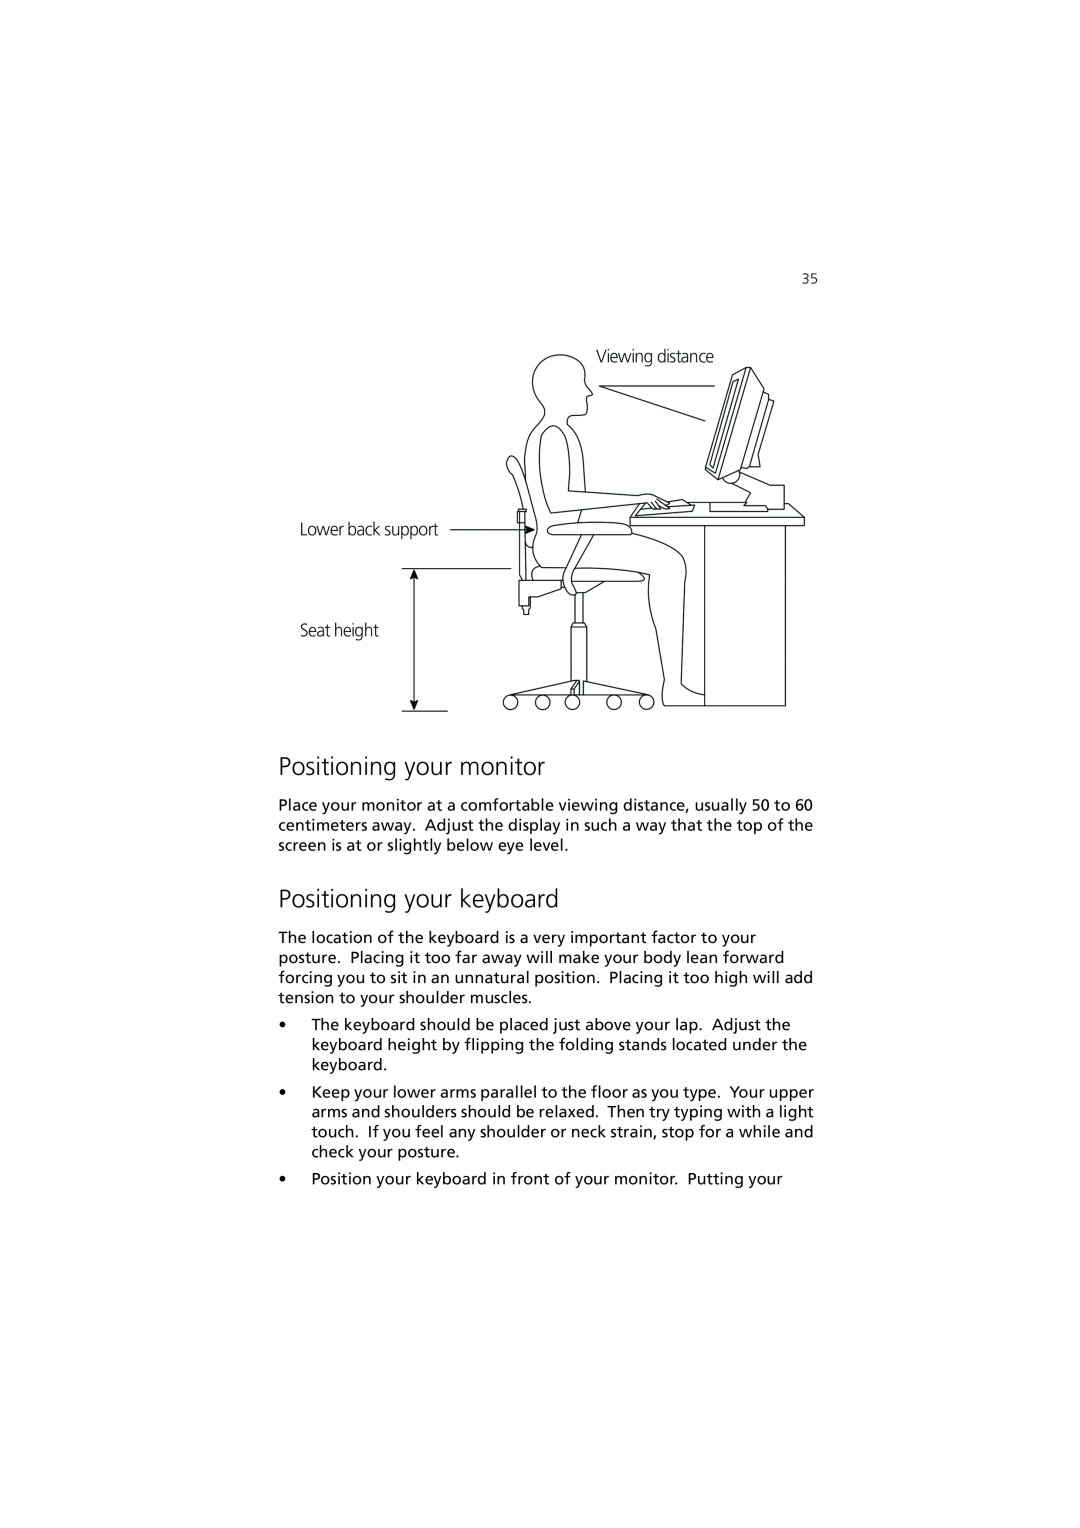 Acer 7600 manual Positioning your monitor, Positioning your keyboard 